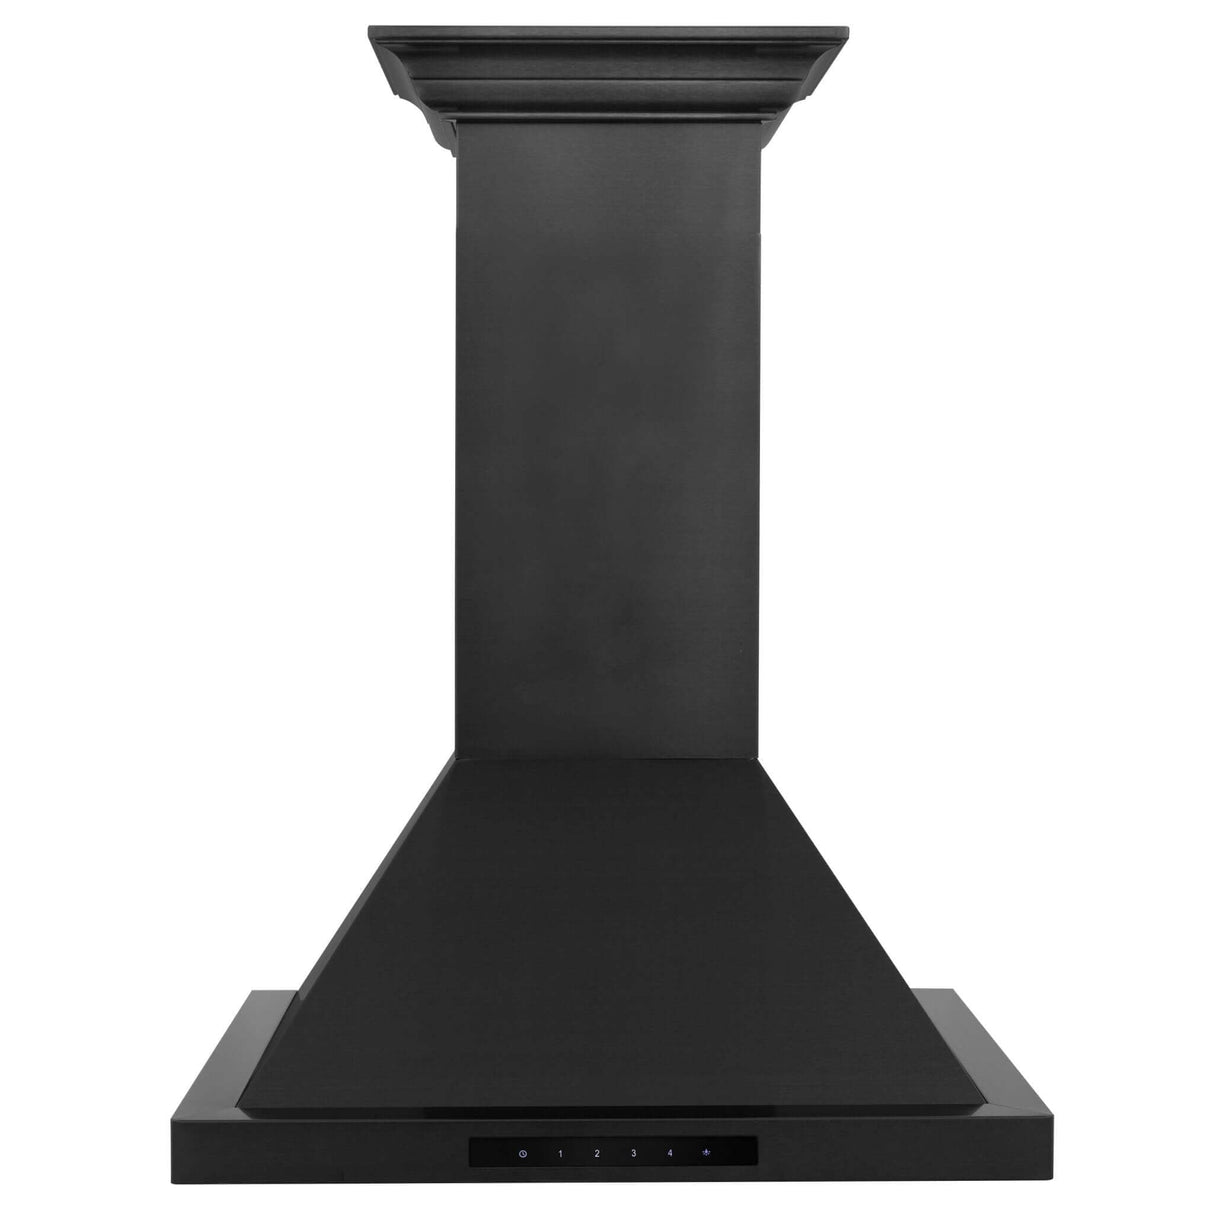 ZLINE Convertible Vent Wall Mount Range Hood in Black Stainless Steel with Crown Molding (BSKBNCRN)